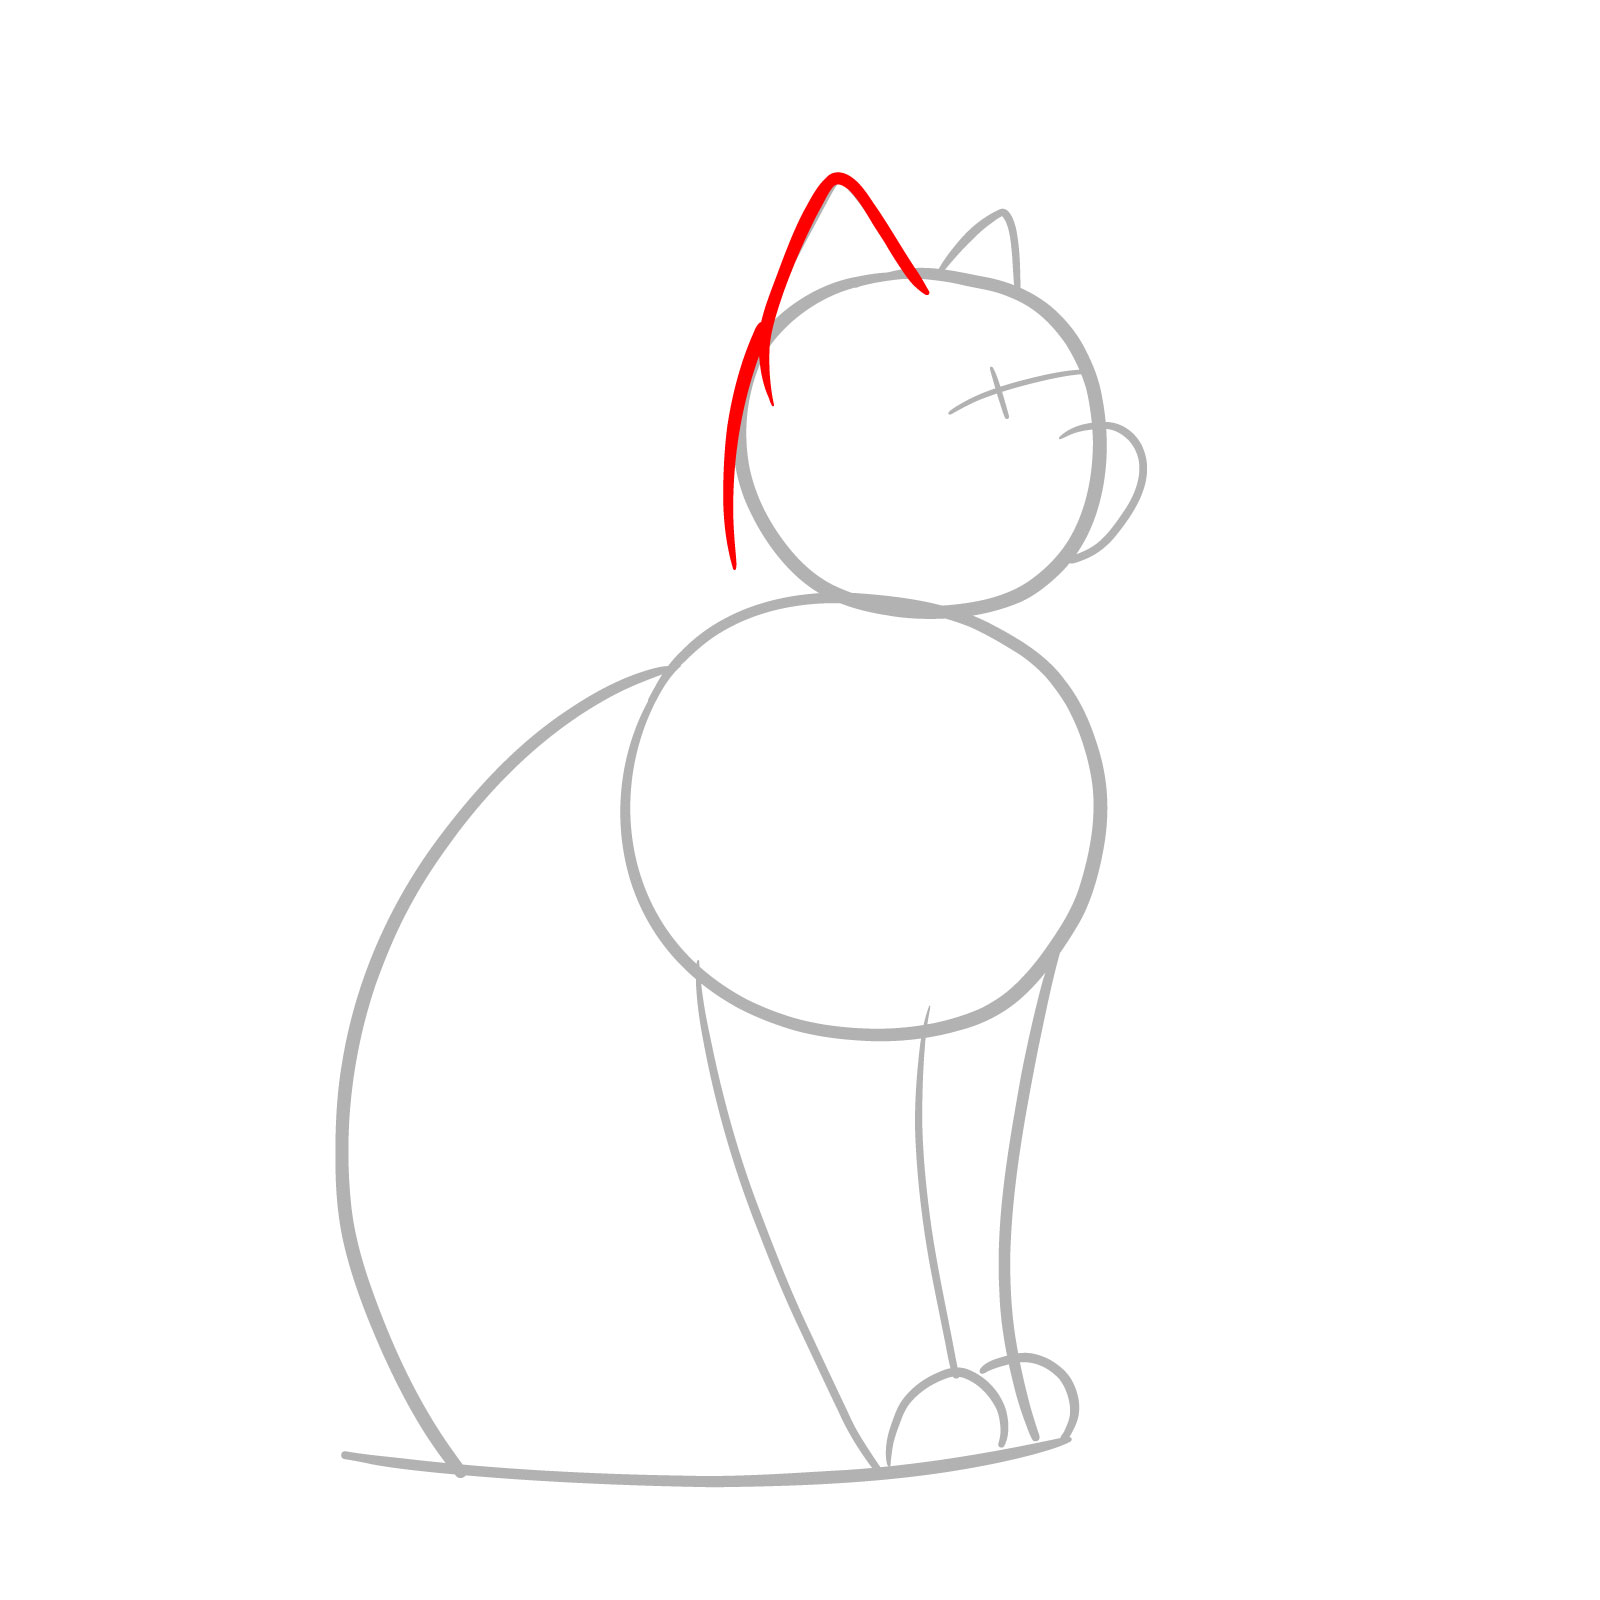 Detailing the cat's head with the first ear and the back curve, indicating how to draw a cat's face from a 3/4 view - step 03